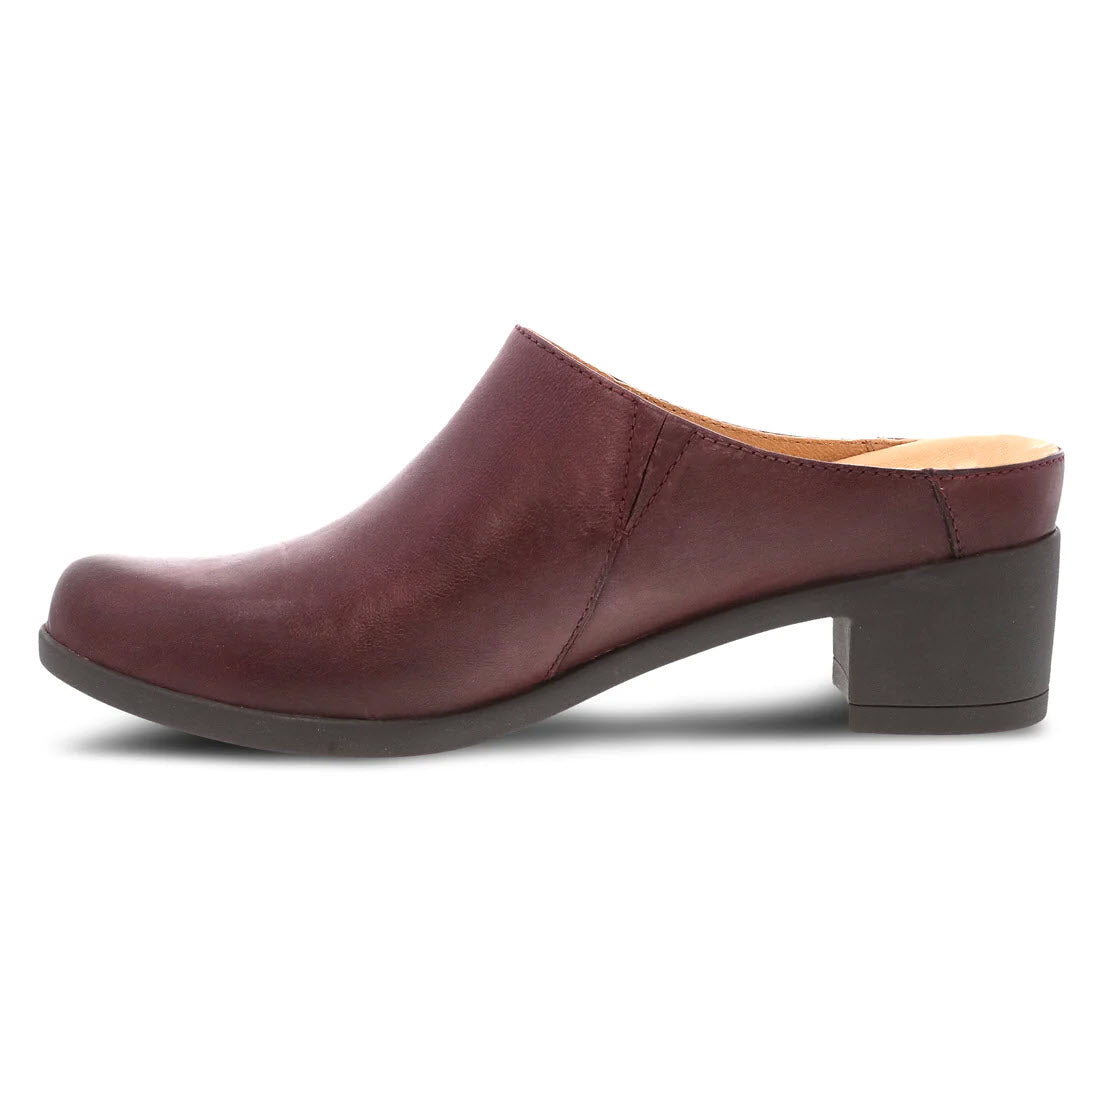 A single DANSKO CARRIE WINE BURNISHED - WOMENS leather backless mule with a low heel, isolated on a white background.